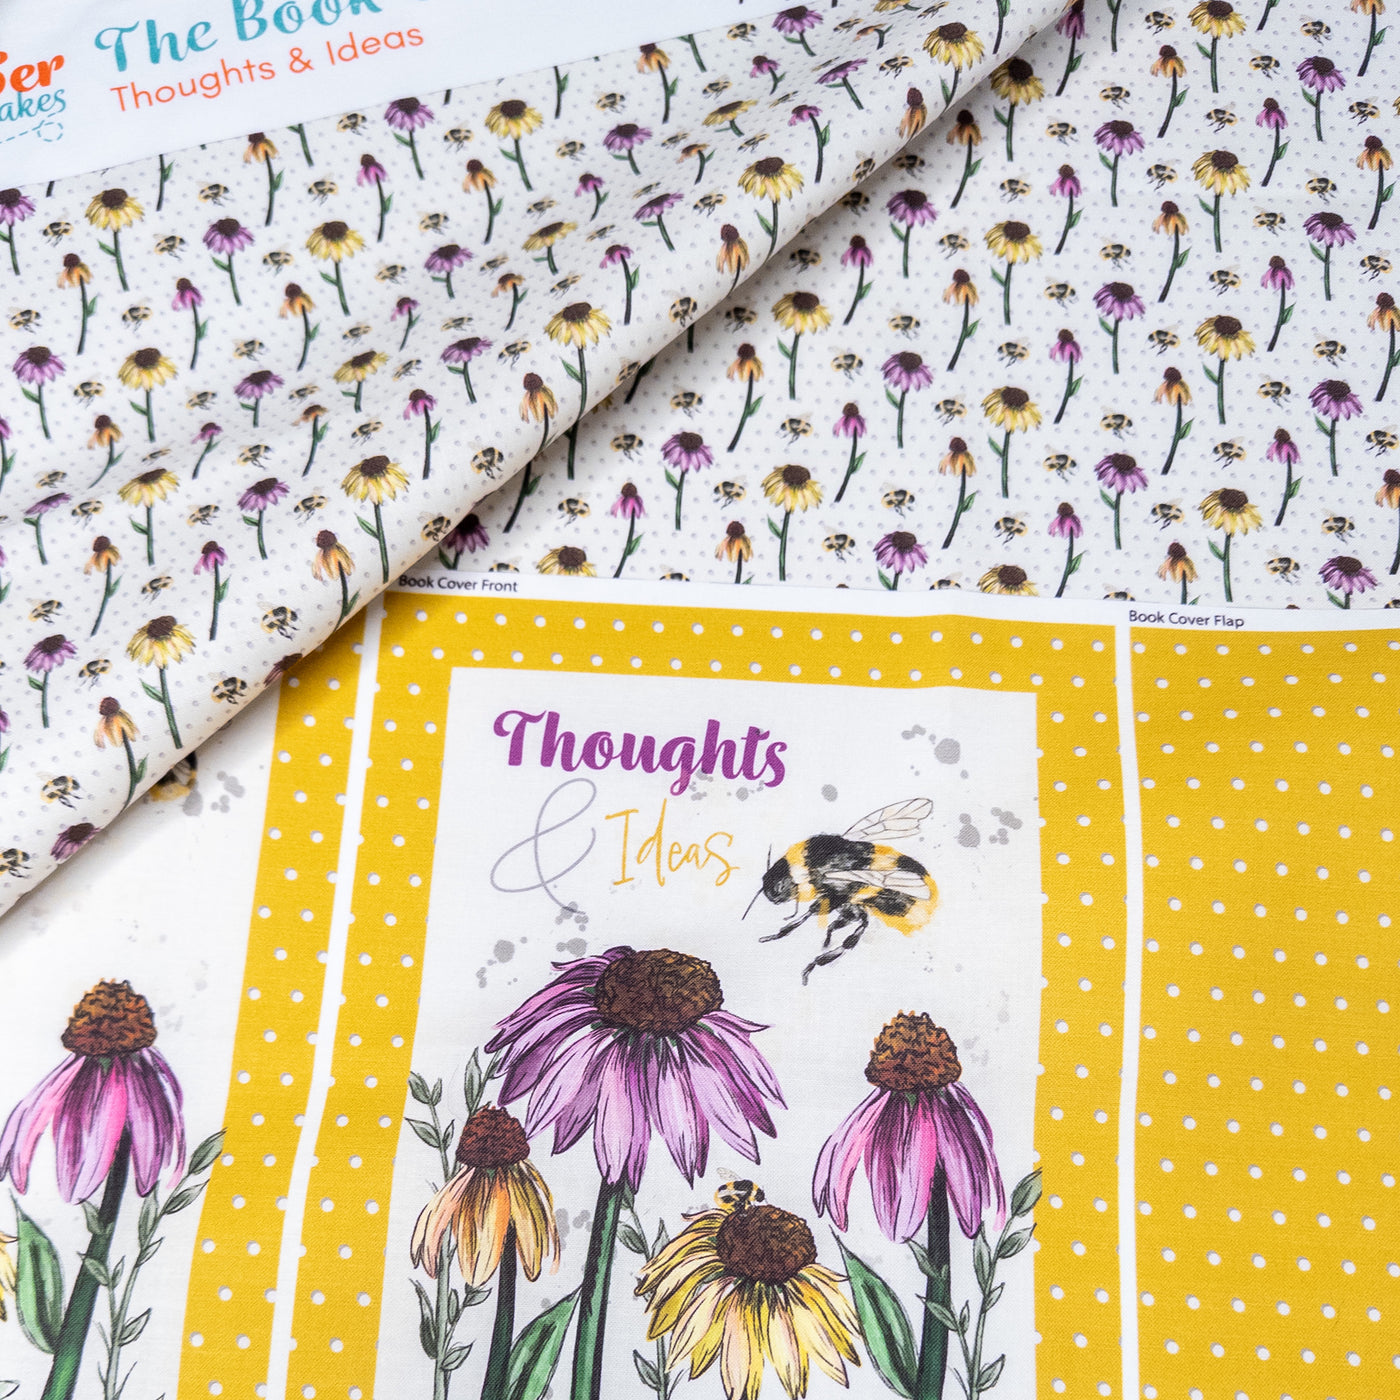 Notebook Cover Sewing Kit - Thoughts and Ideas floral Notebook Cover Cut and Sew Fabric Panel Amber Makes